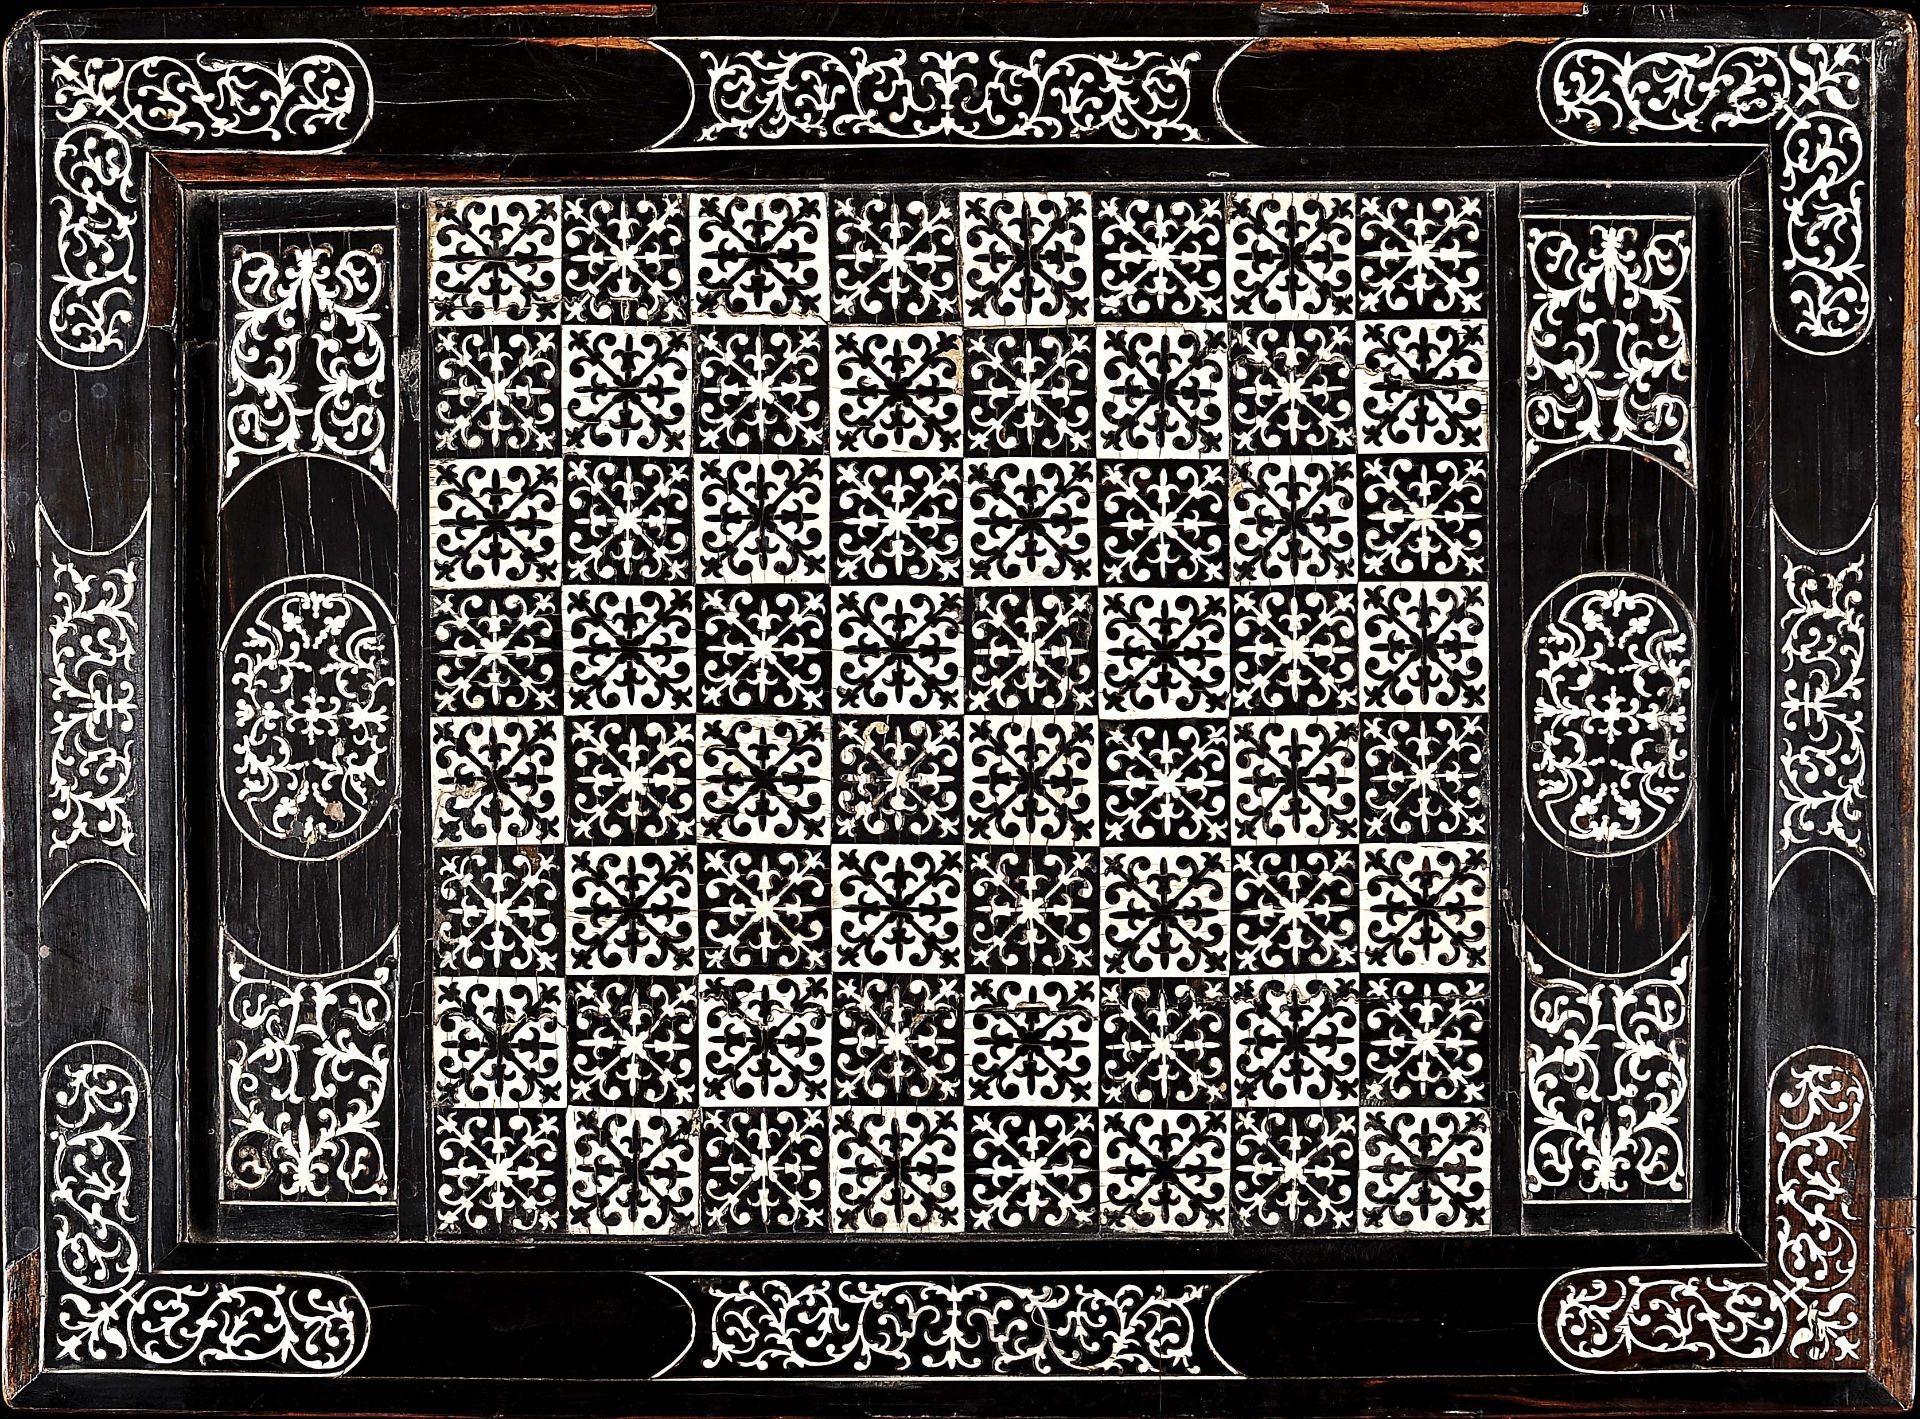 Chess, Backgammon and Nine Men's Morris Board (Ginner Game) articulated closing in the form of a box - Image 2 of 8